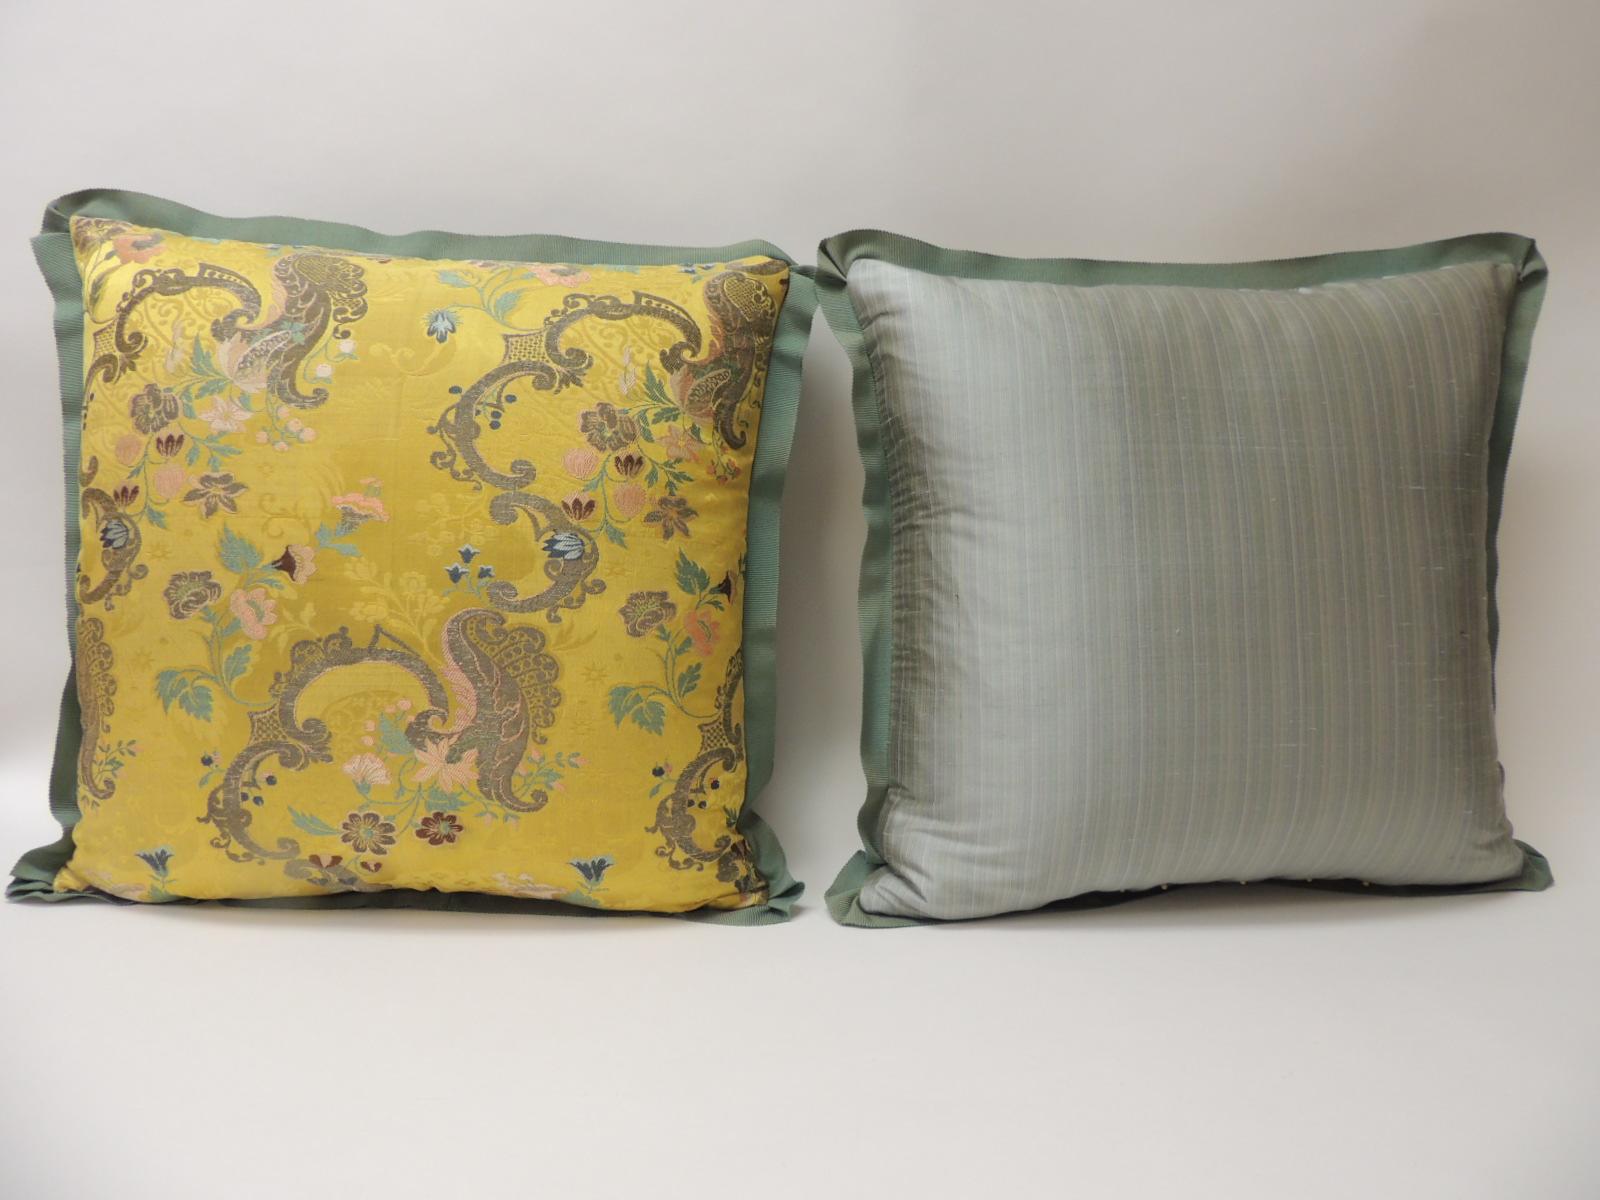 Hand-Crafted Pair of Antique Green and Gold Brocade French Silk Decorative Pillows